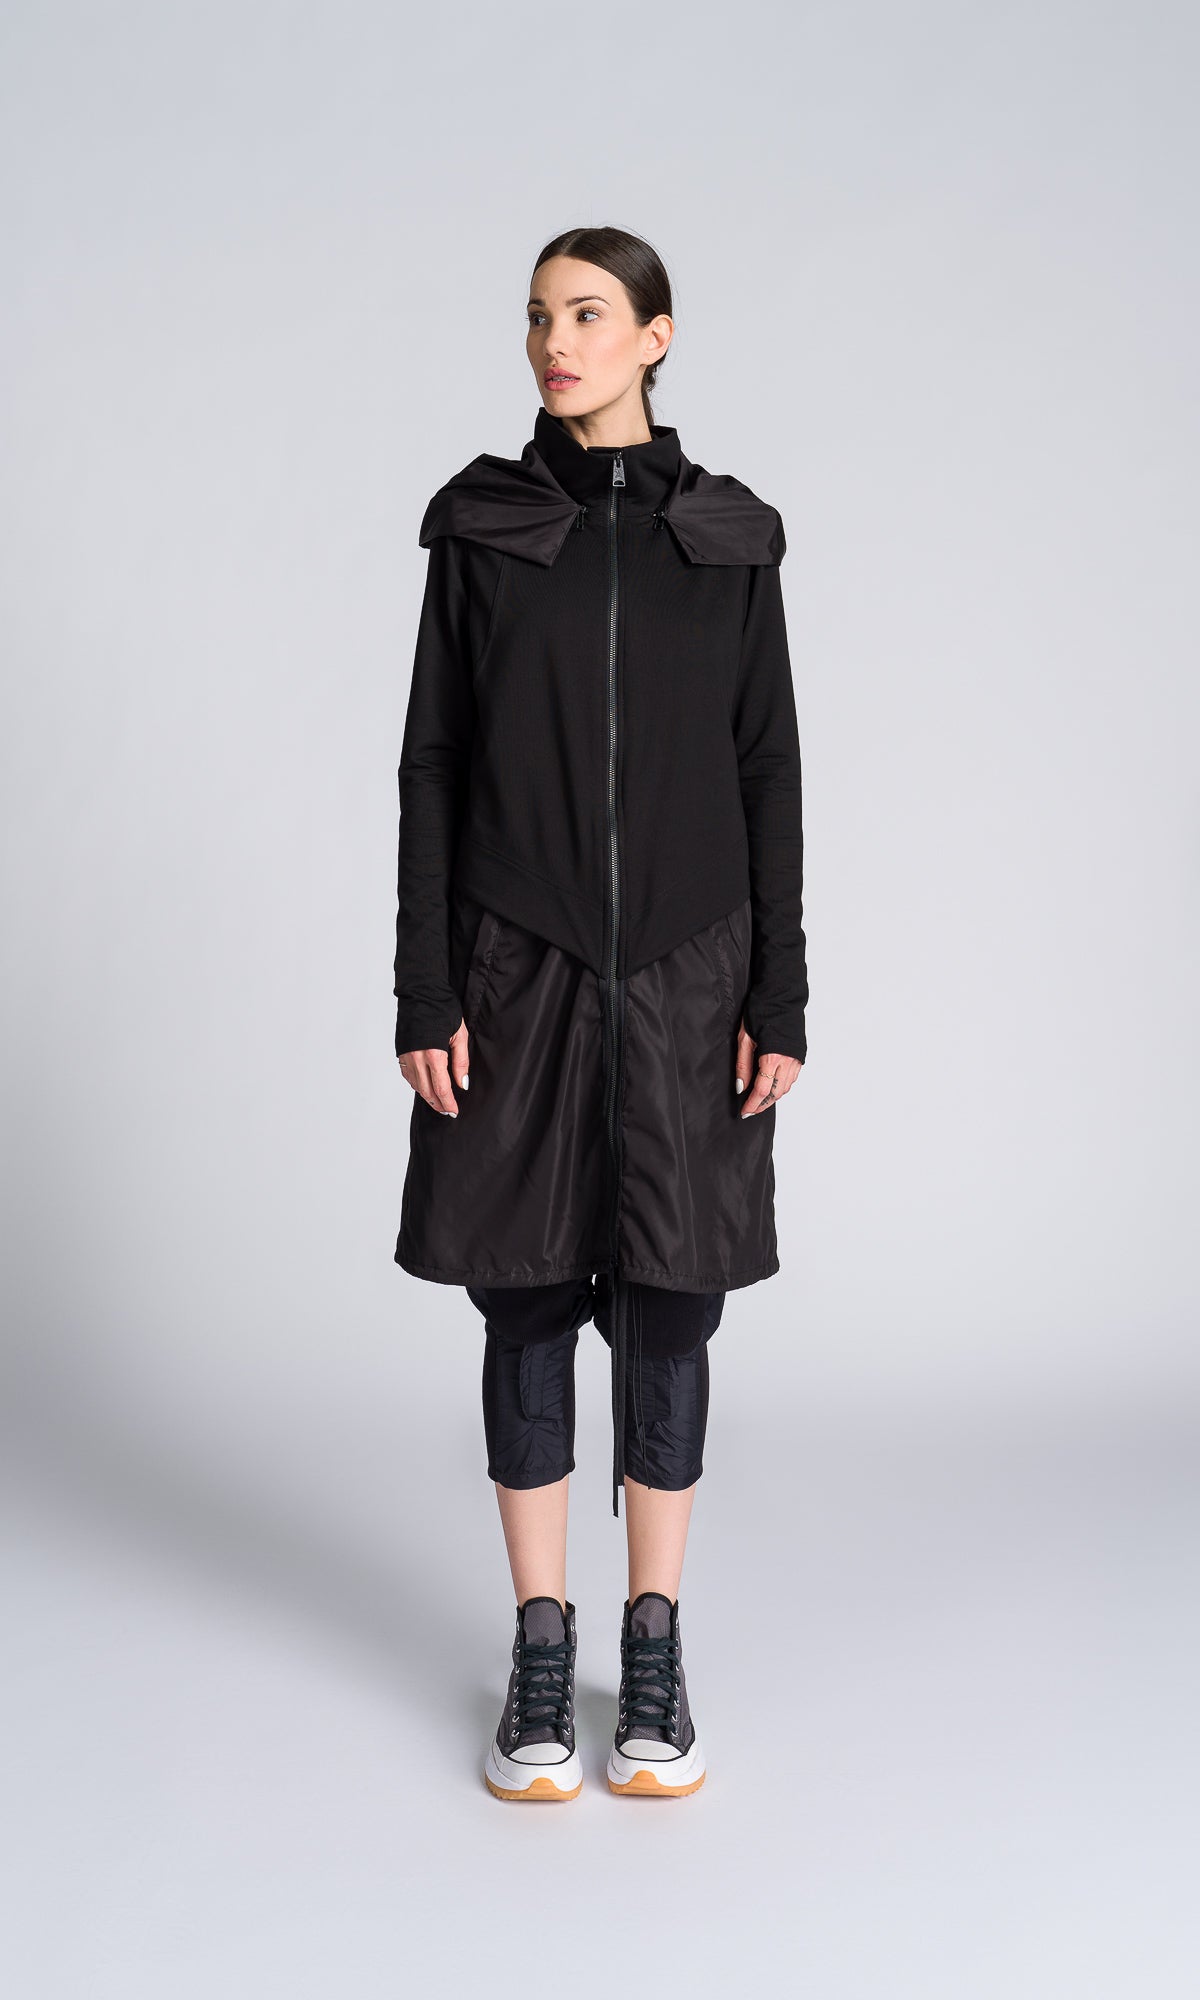 Long Hooded Jacket with Backpack Straps